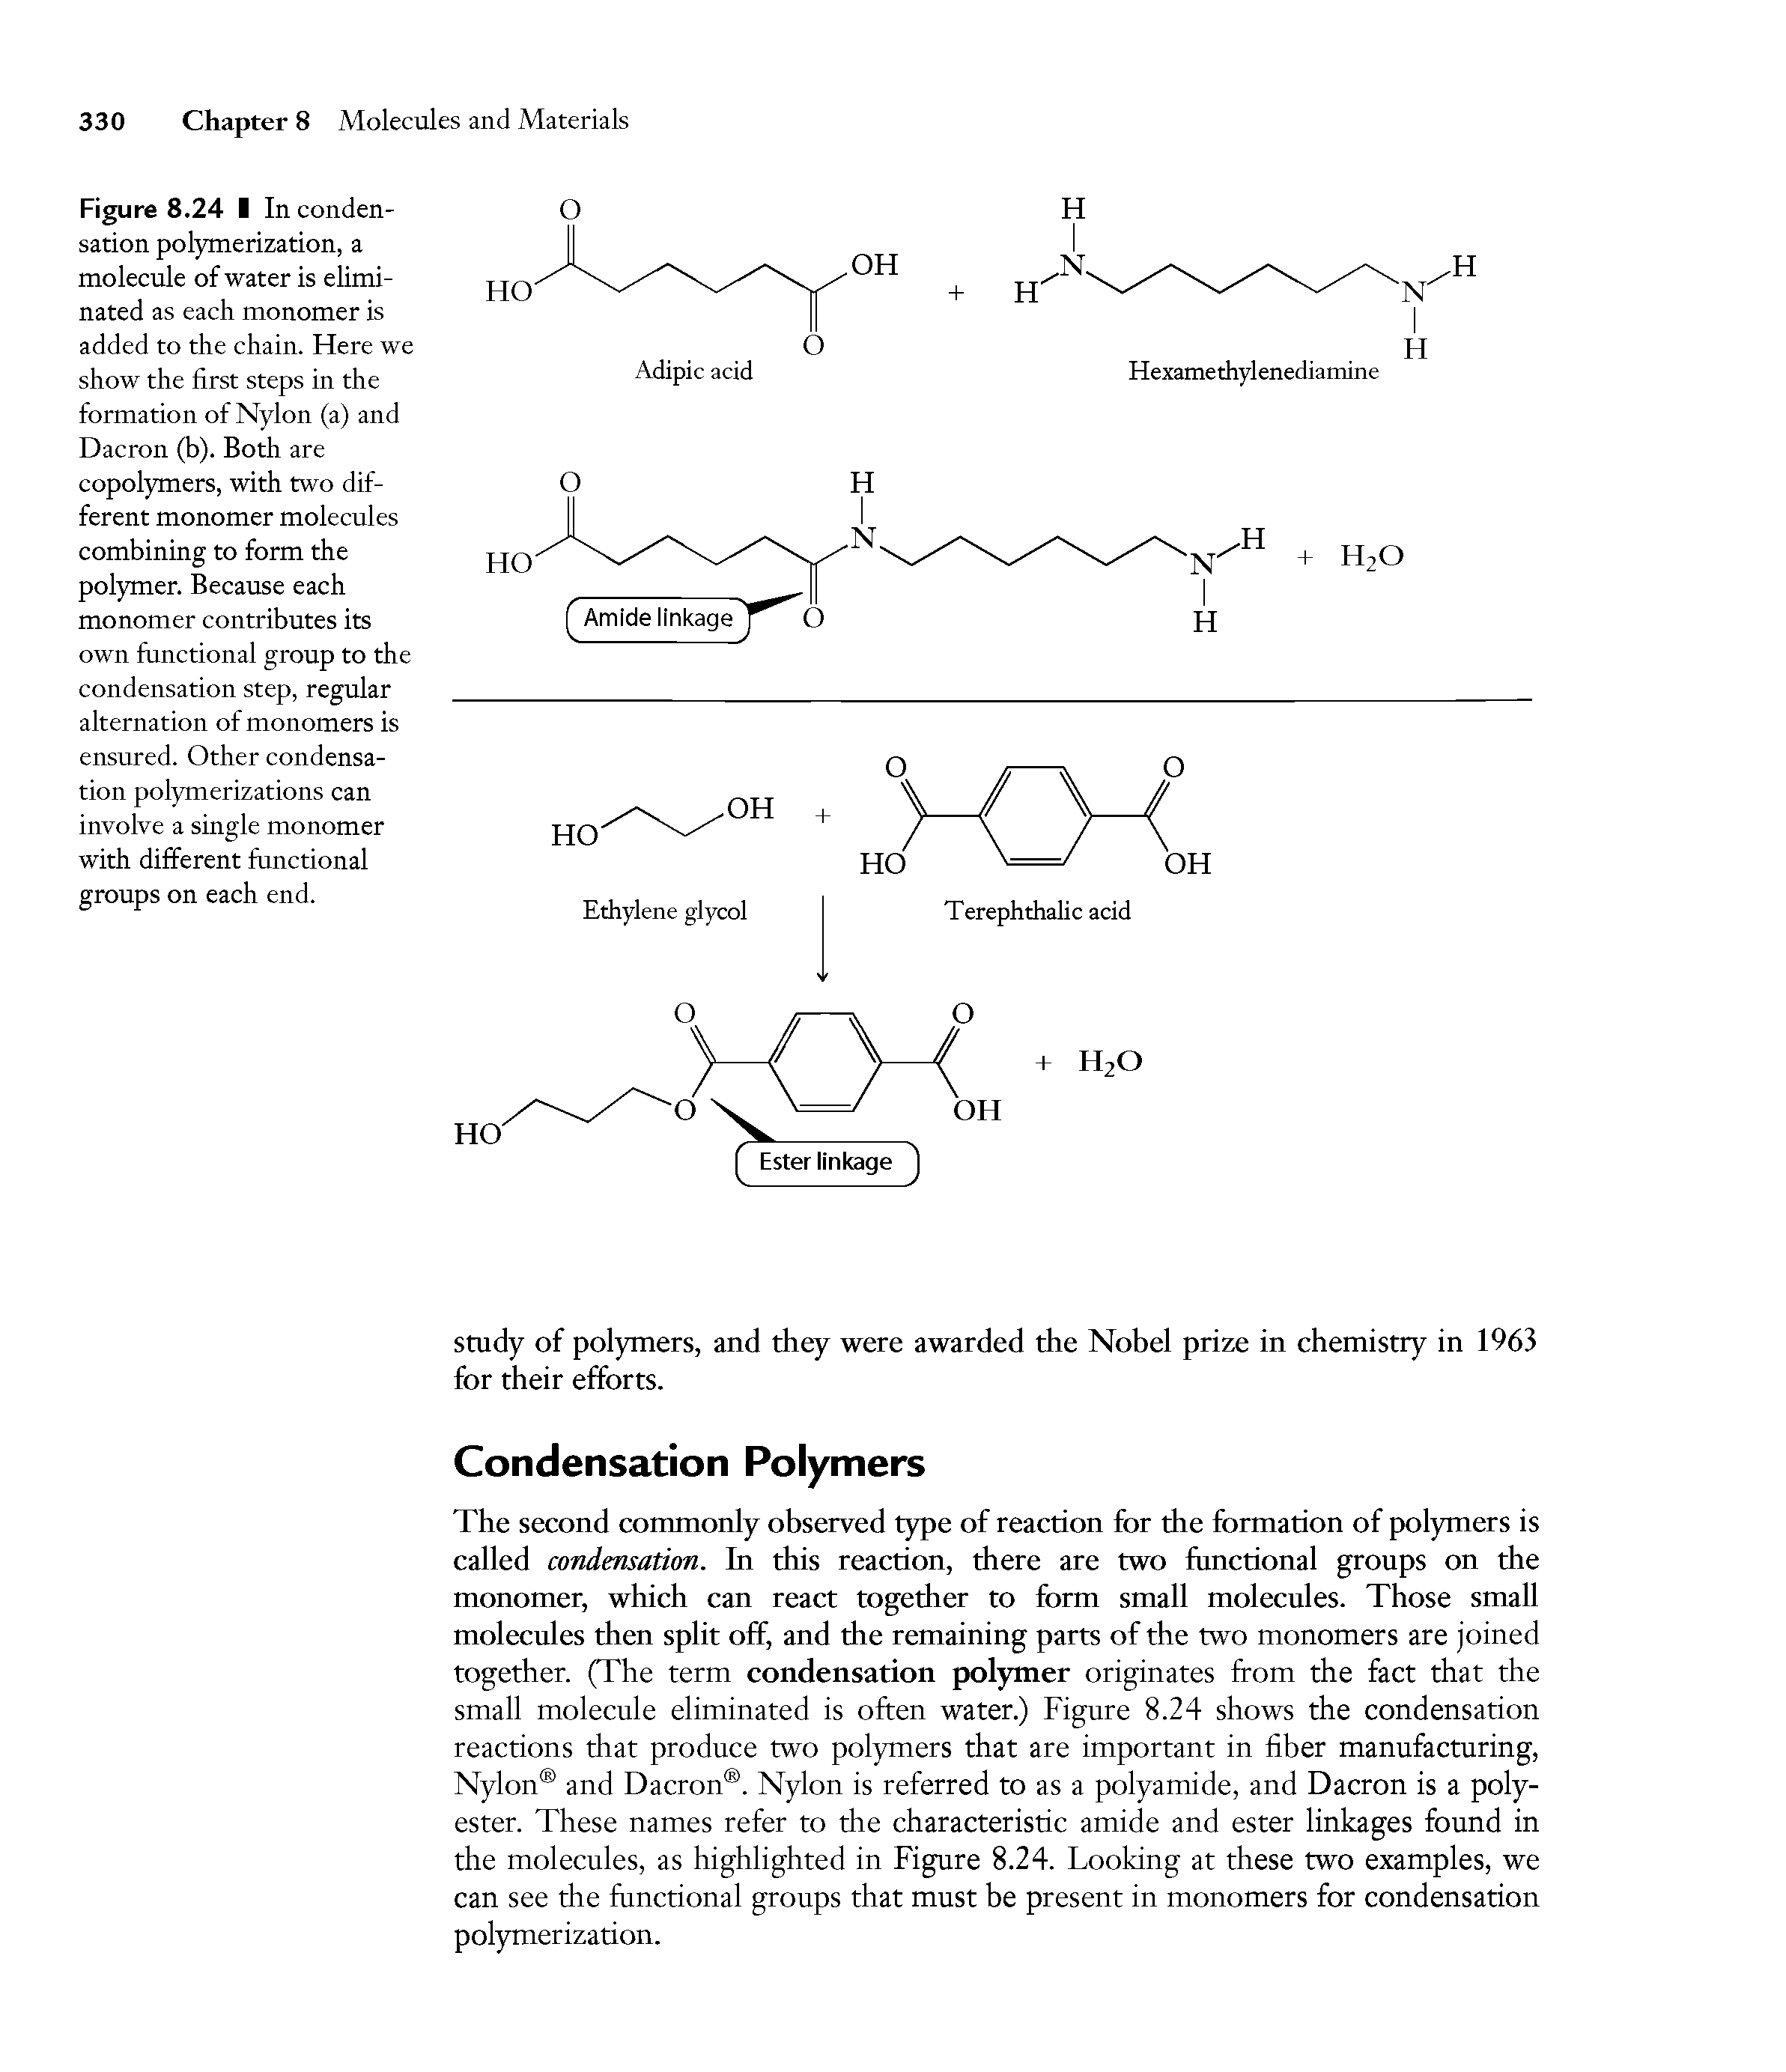 Figure 8.24 I In condensation polymerization, a molecule of water is eliminated as each monomer is added to the chain. Here we show the first steps in the formation of Nylon (a) and Dacron (b). Both are copolymers, with two different monomer molecules combining to form the polymer. Because each monomer contributes its own functional group to the condensation step, regular alternation of monomers is ensured. Other condensation polymerizations can involve a single monomer with different functional groups on each end.